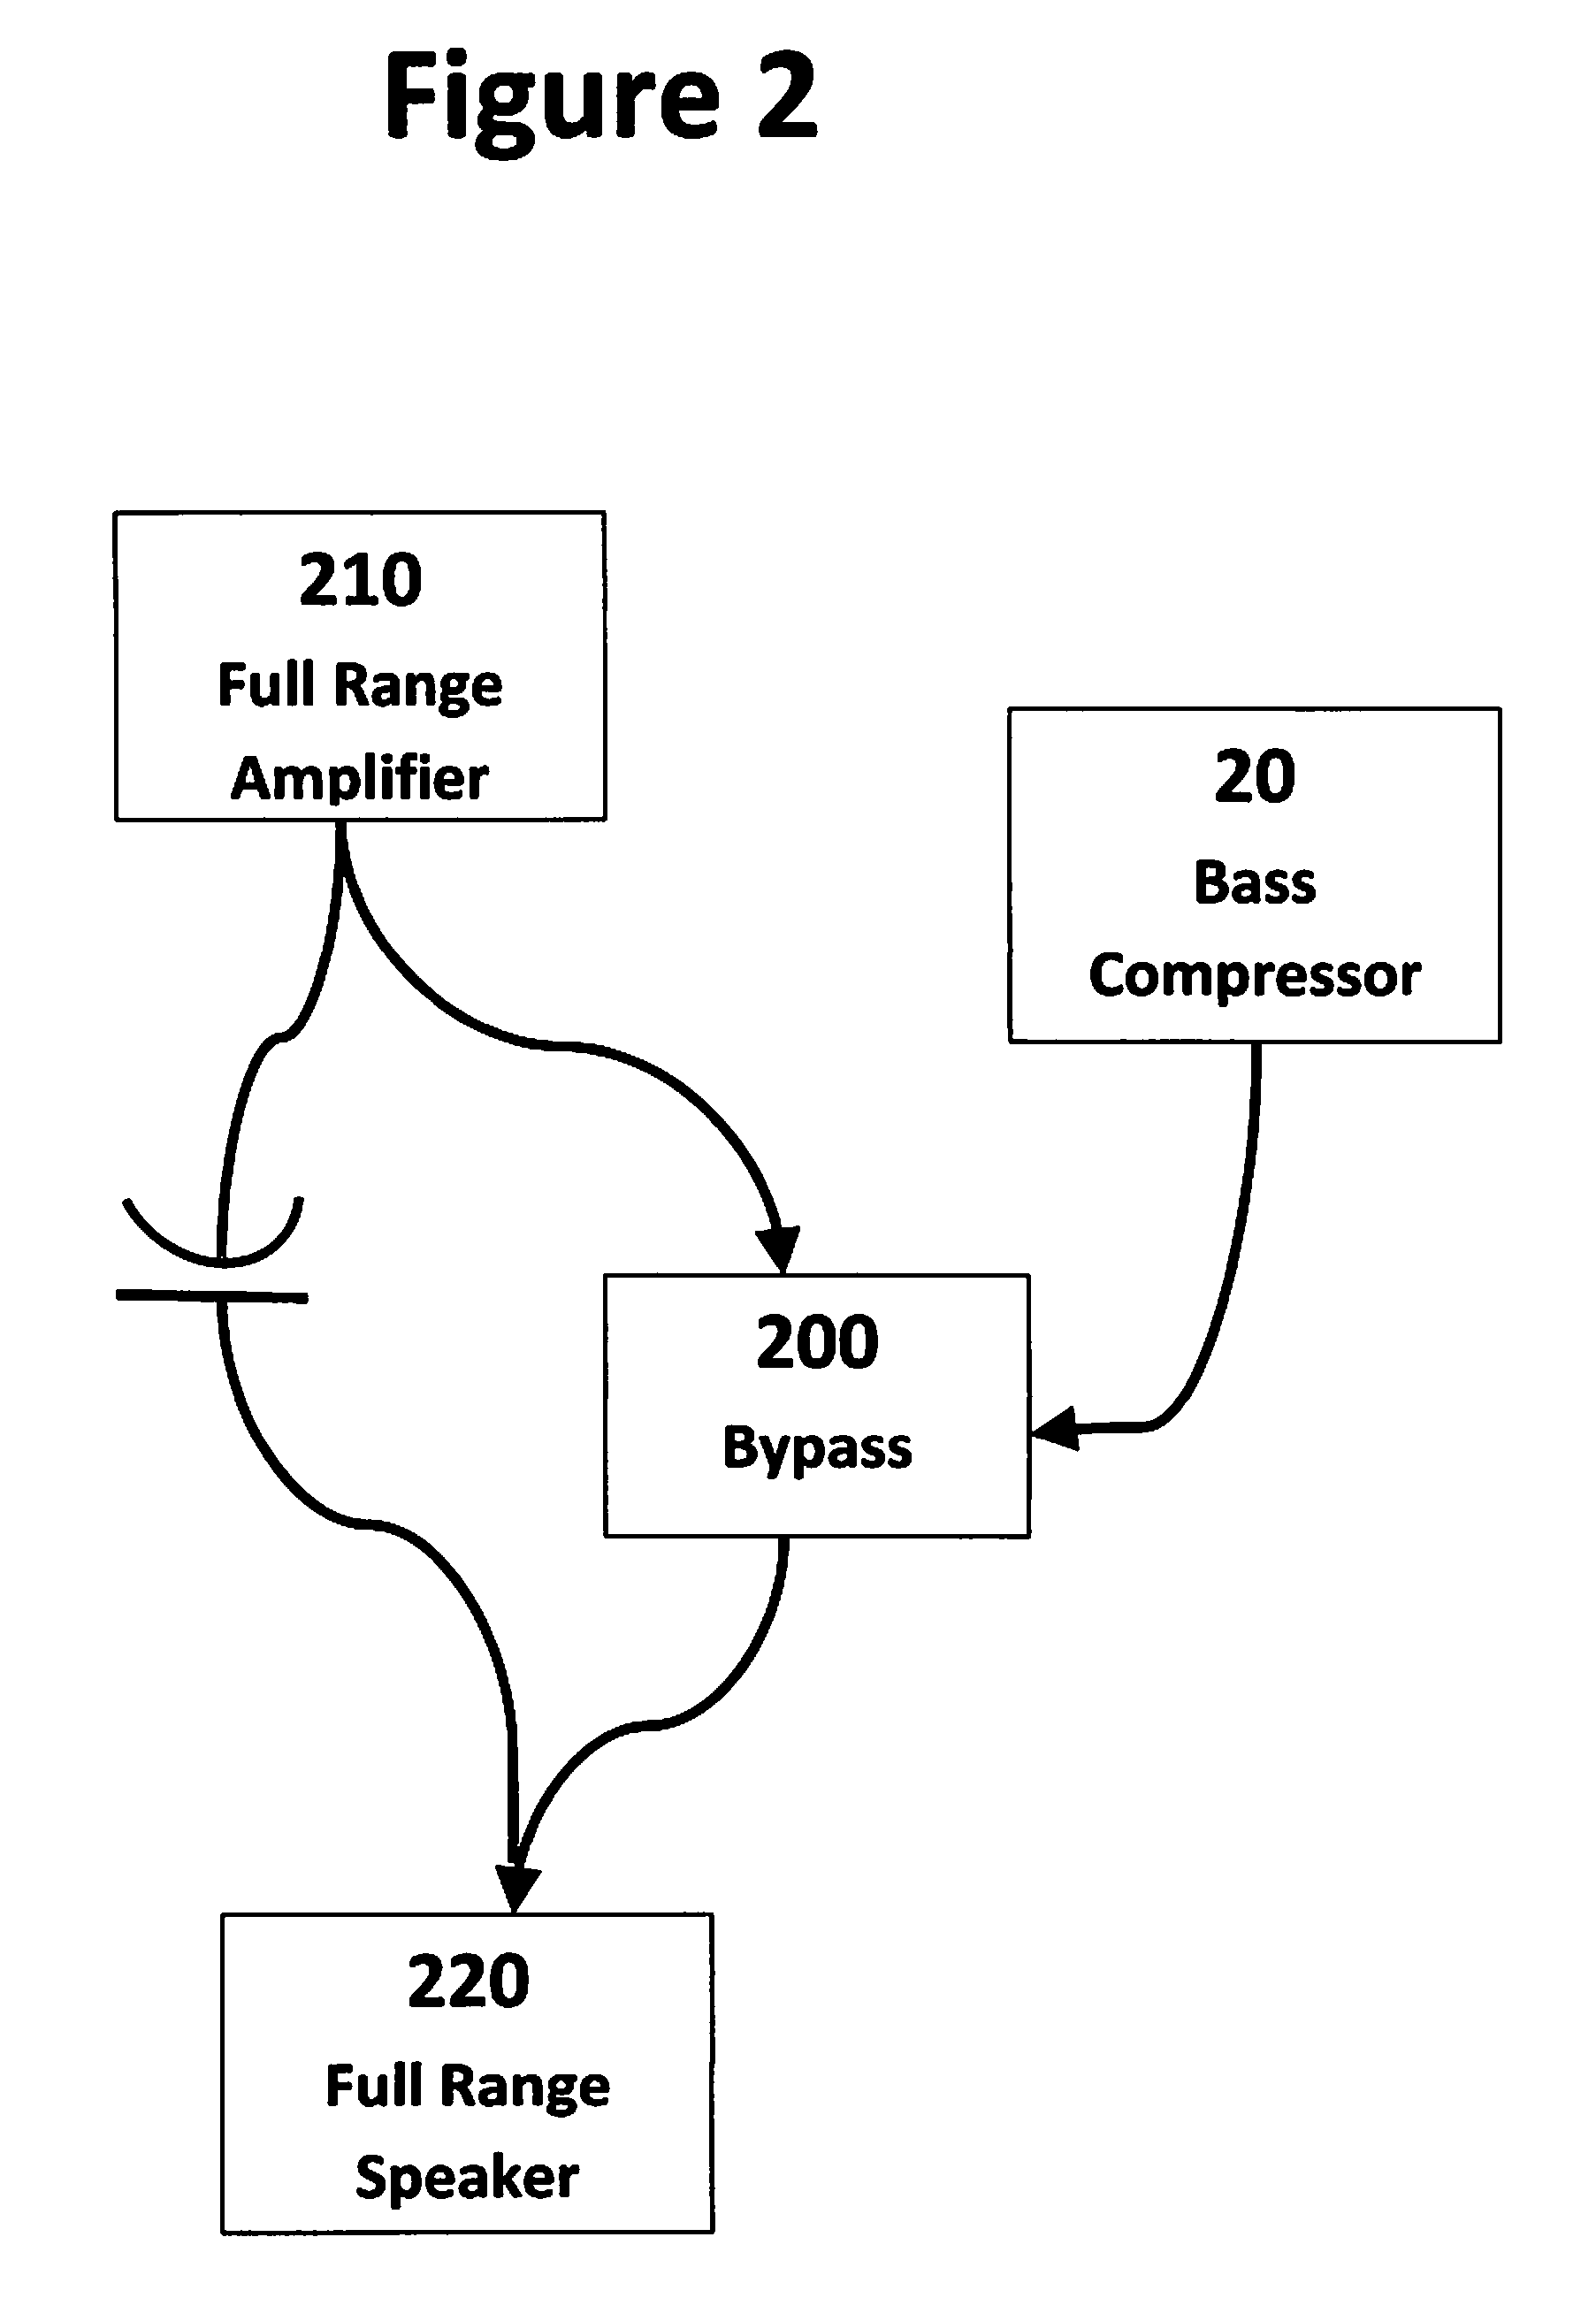 Acoustic speaker system with strong bass capability